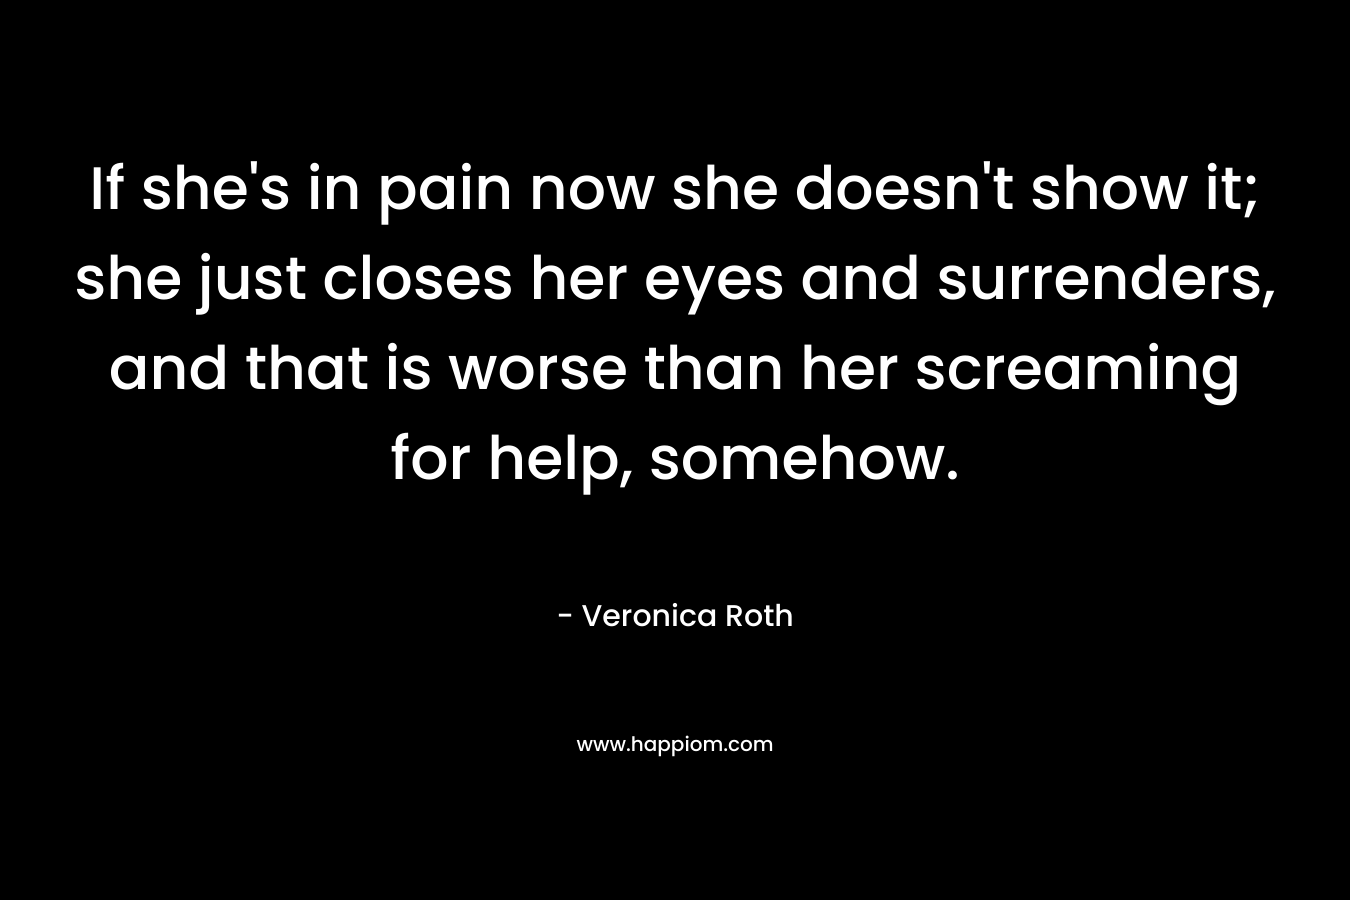 If she's in pain now she doesn't show it; she just closes her eyes and surrenders, and that is worse than her screaming for help, somehow.